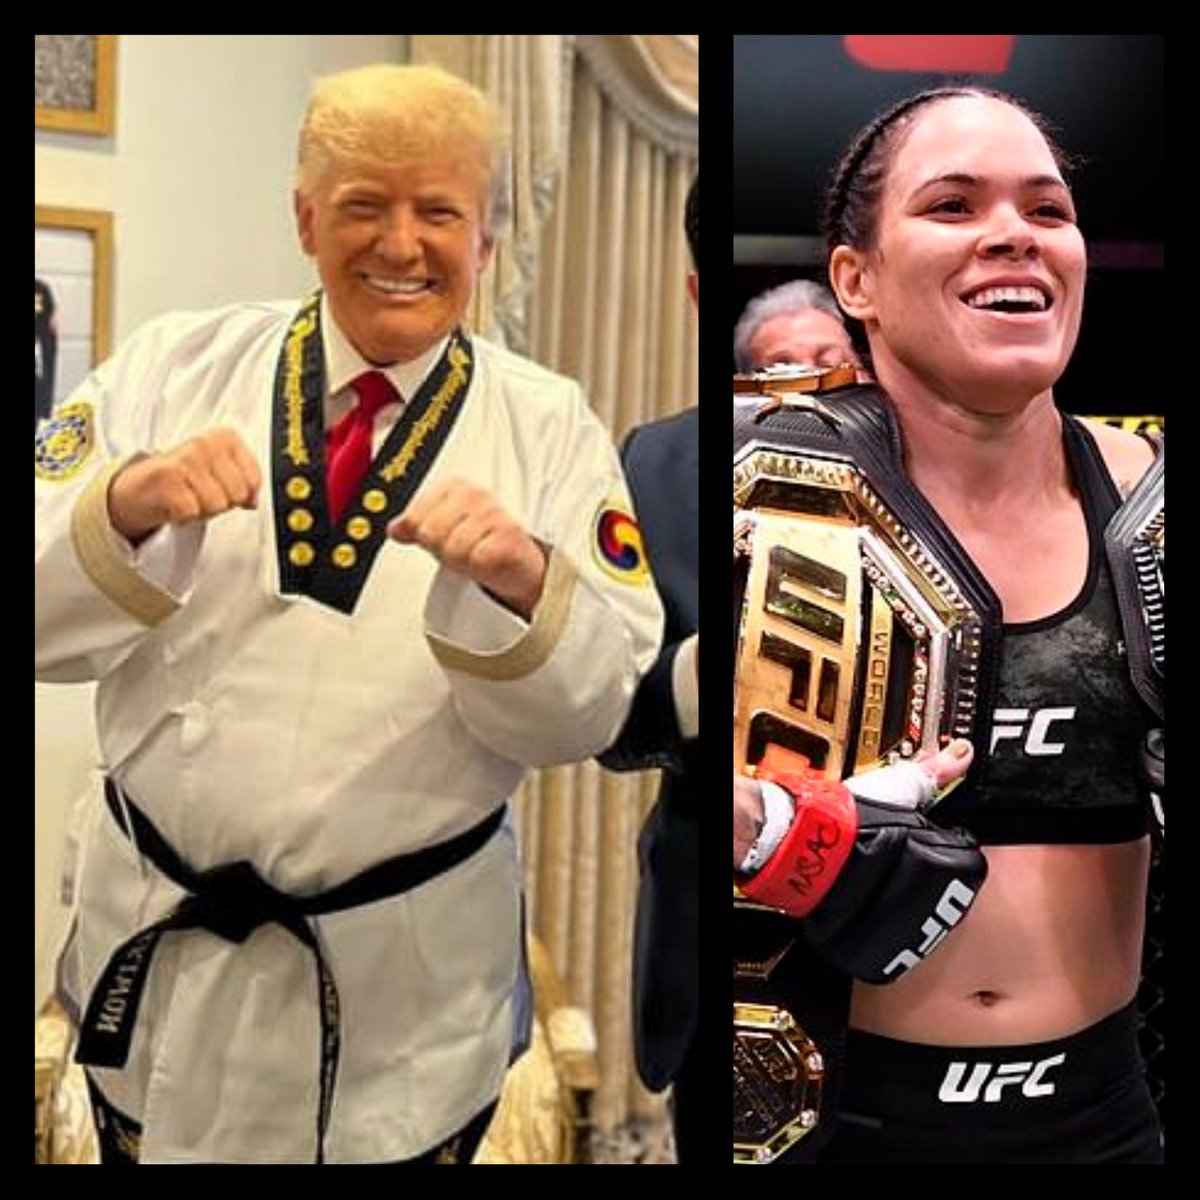 RT @73MilitaryMama: I would LOVE to see Trump get his ass kicked by Amanda Nunes. https://t.co/8czWt2xCIE